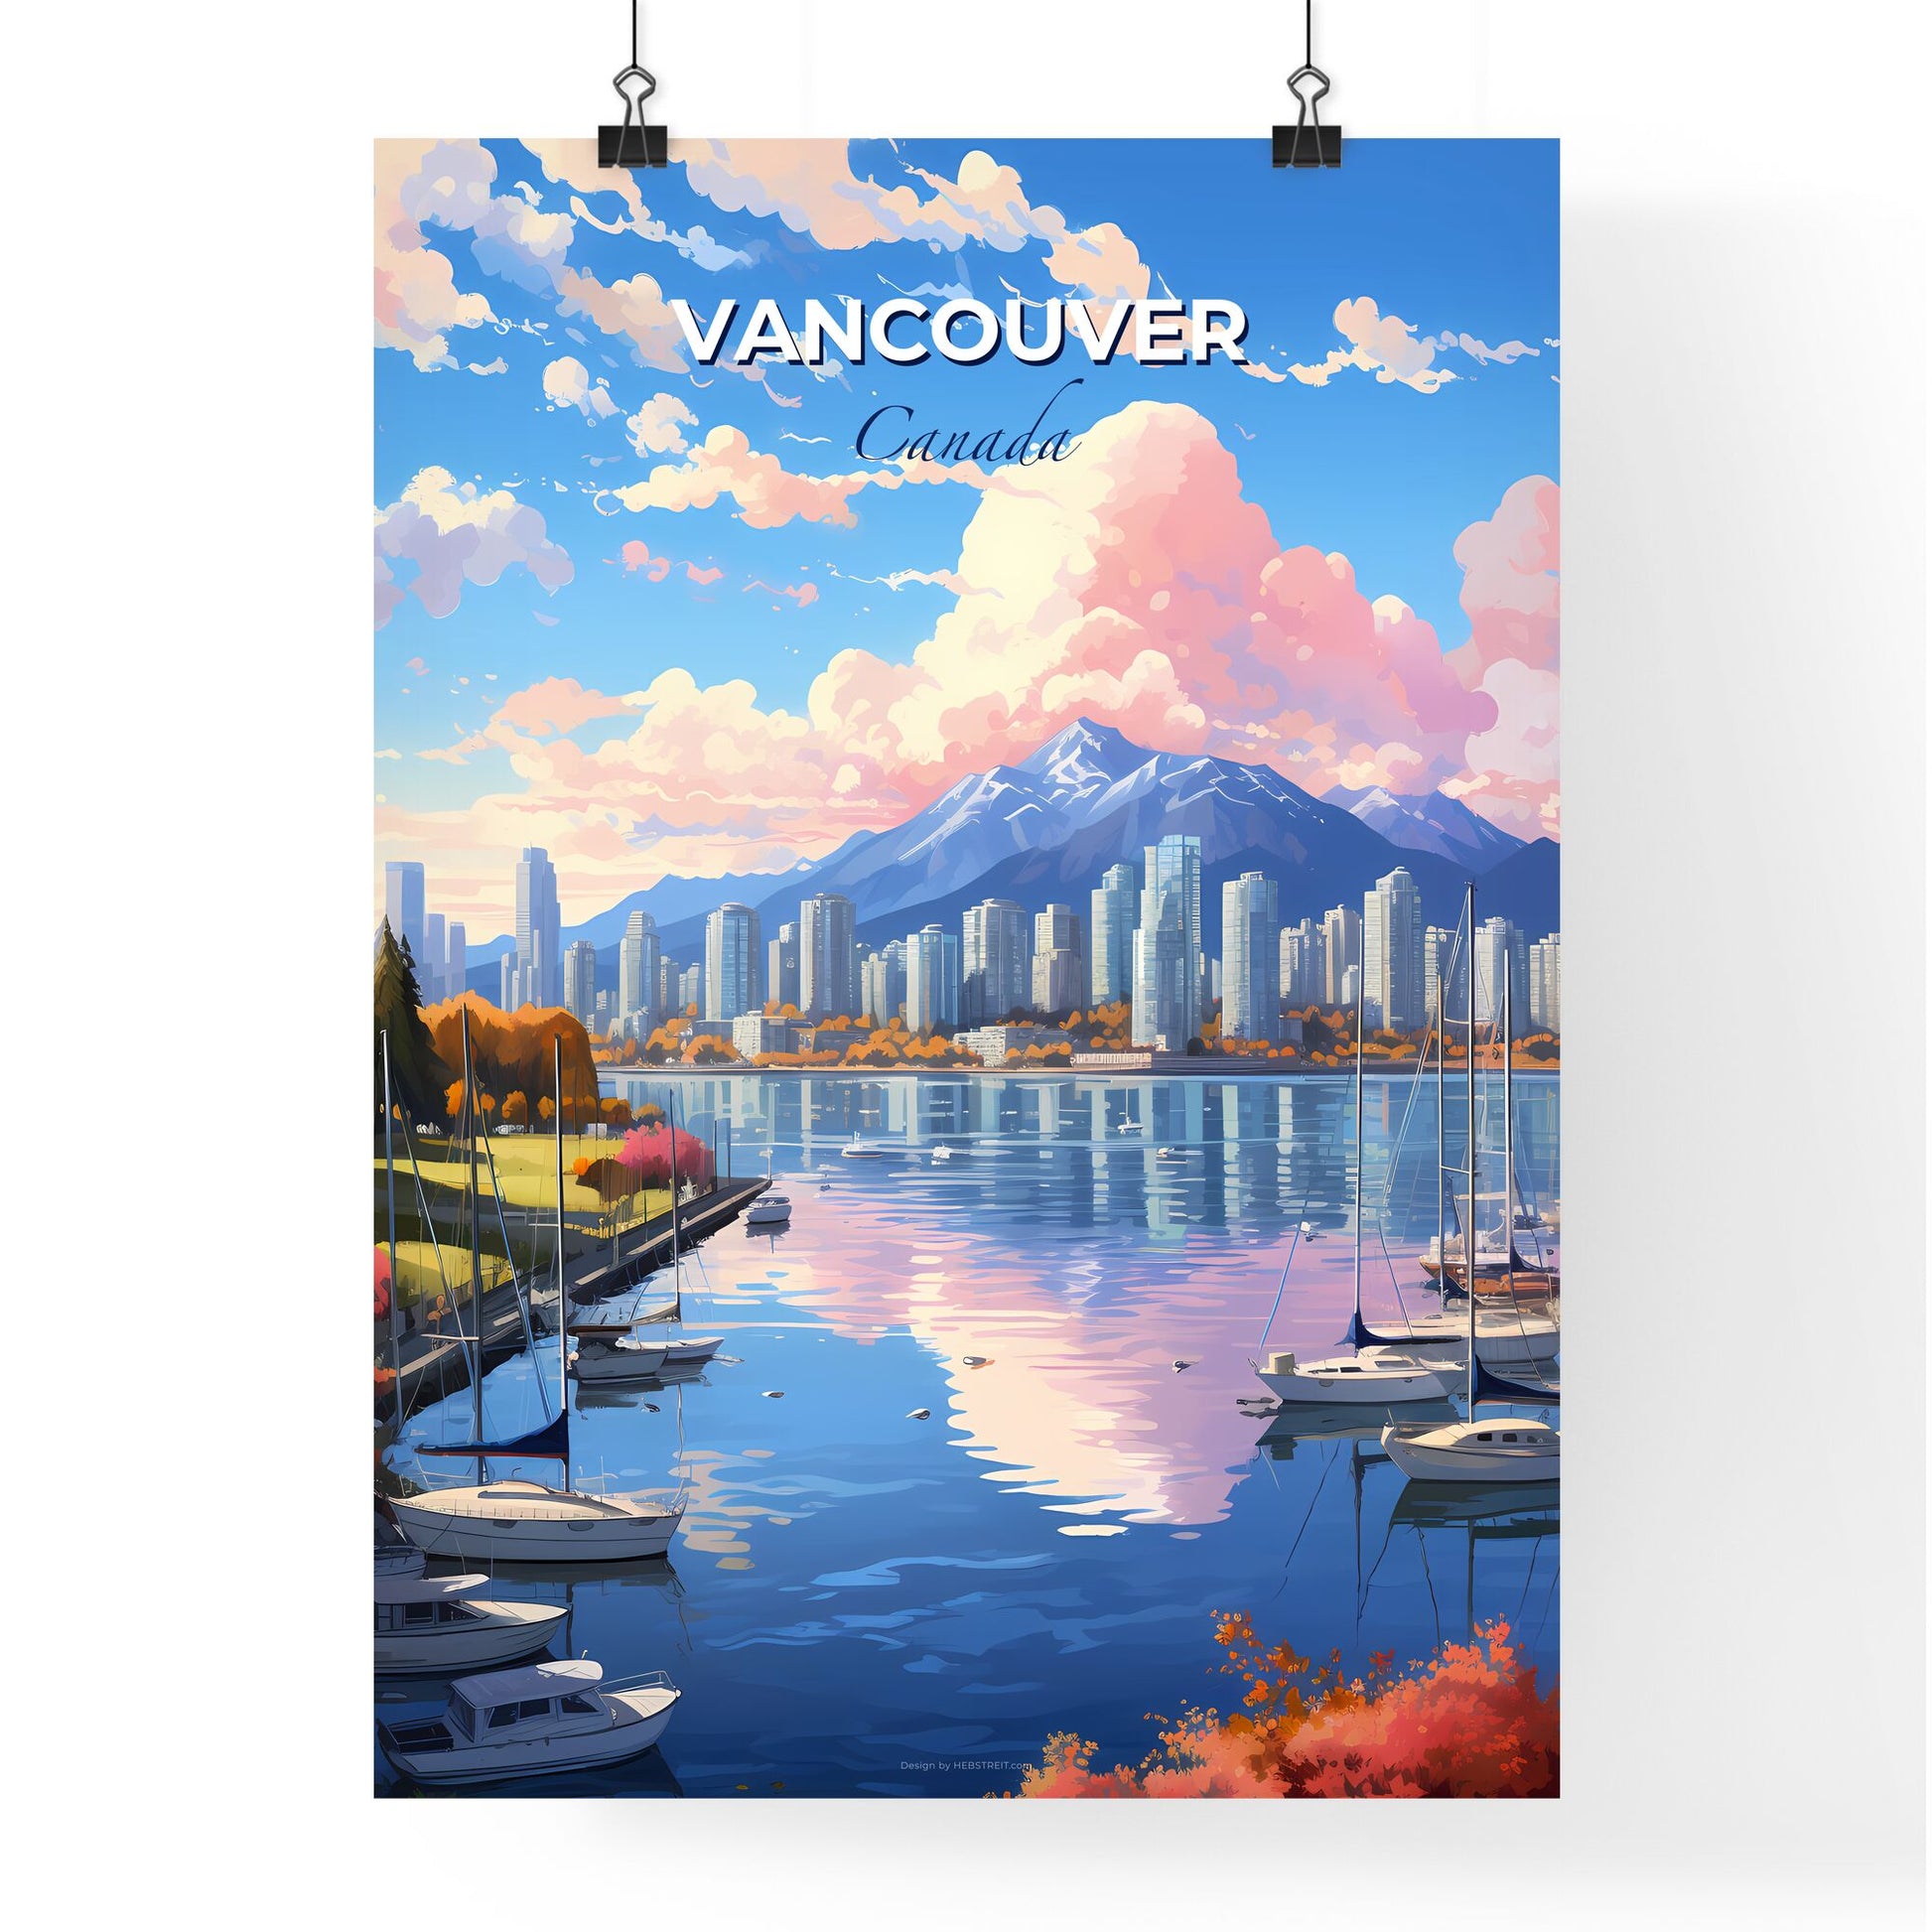 Vancouver Canada Skyline - A City With A Mountain In The Background - Customizable Travel Gift Default Title